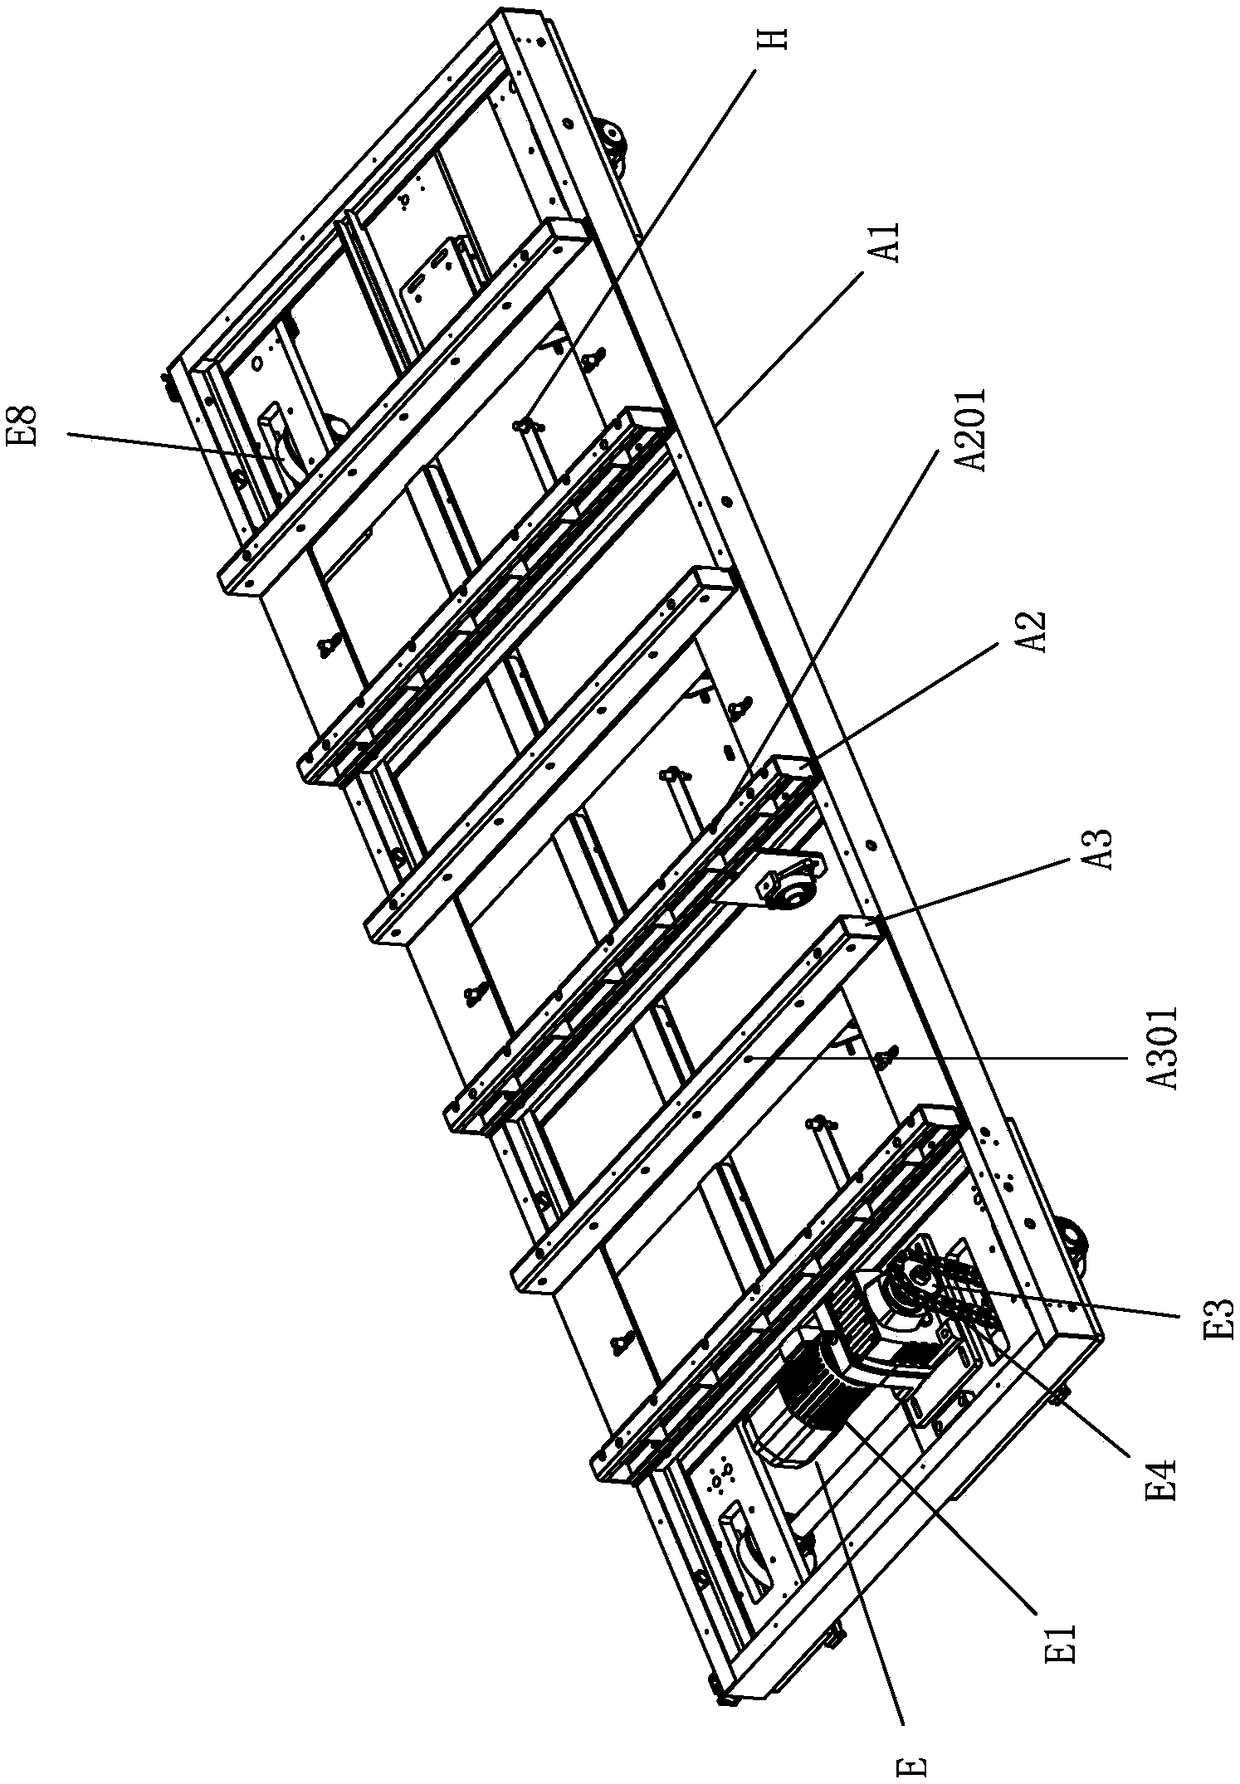 Rail guided vehicle with fork-position transverse transmission function